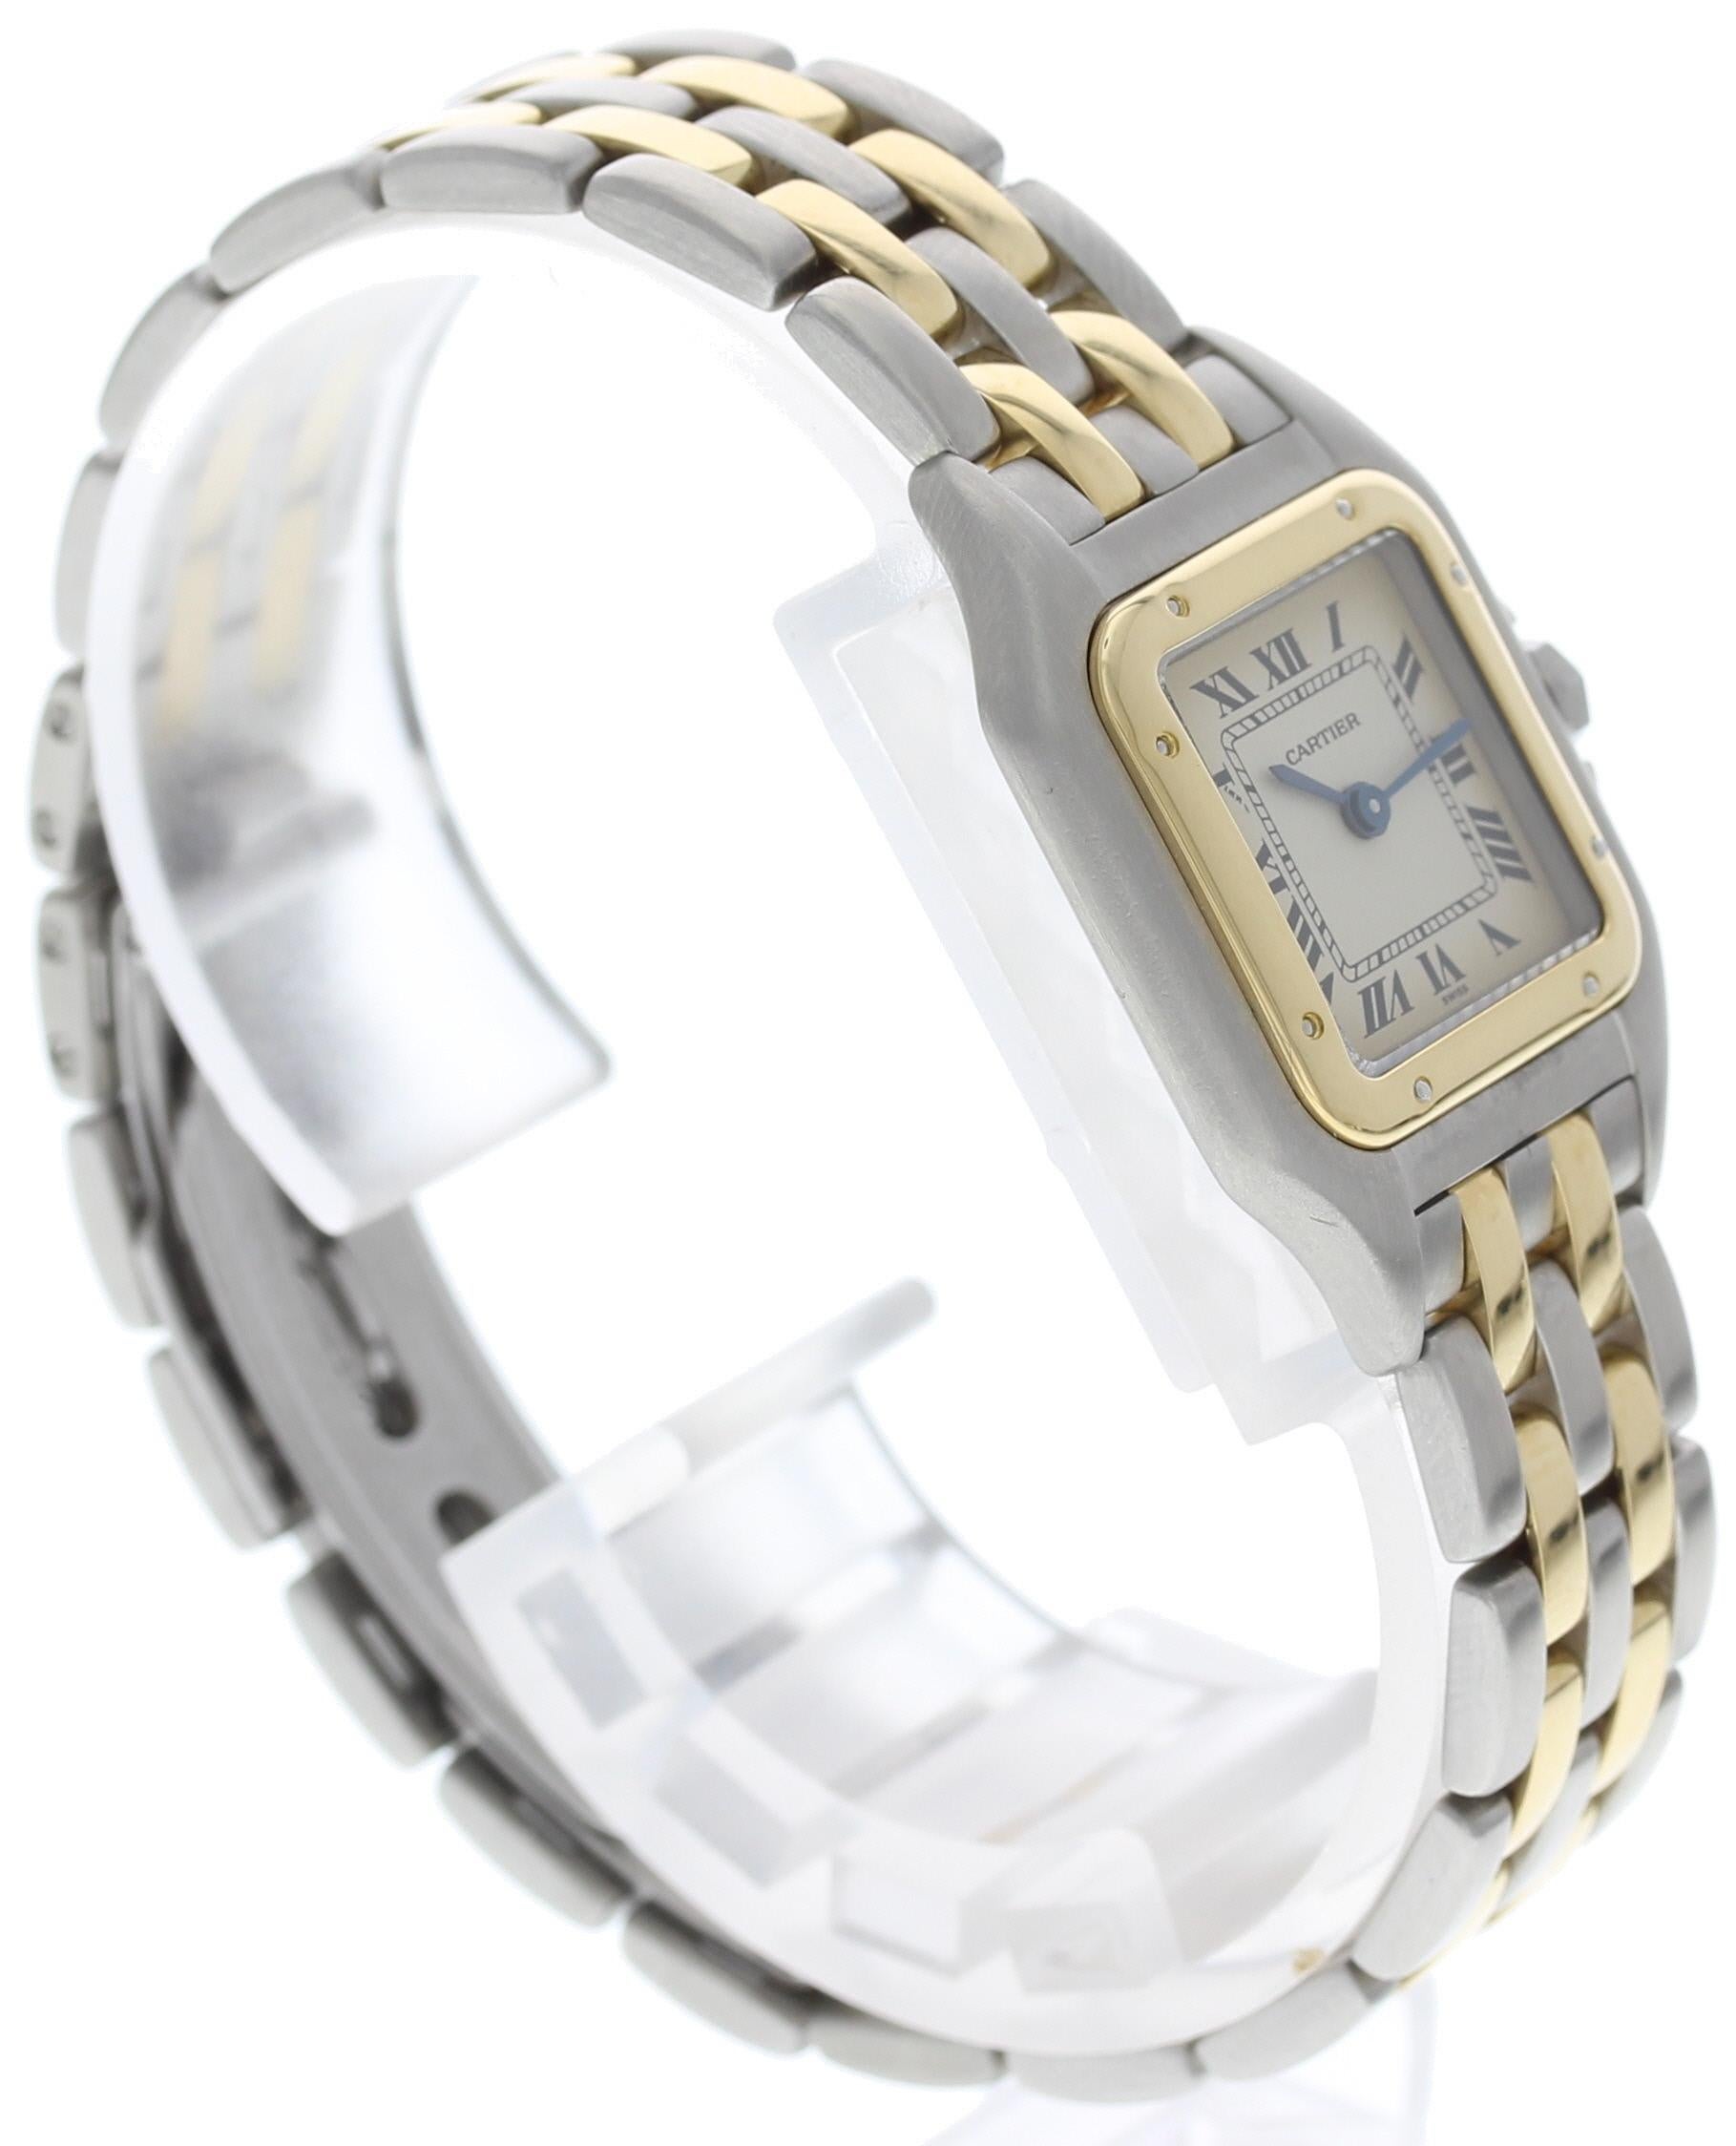 Ladies Cartier Panthere. 22 mm stainless steel case. 18k yellow gold bezel. Off-White dial with blue hands and black roman numeral markers. 18k yellow gold and stainless steel band with two rows of gold links. Steel hidden butterfly clasp. Will fit